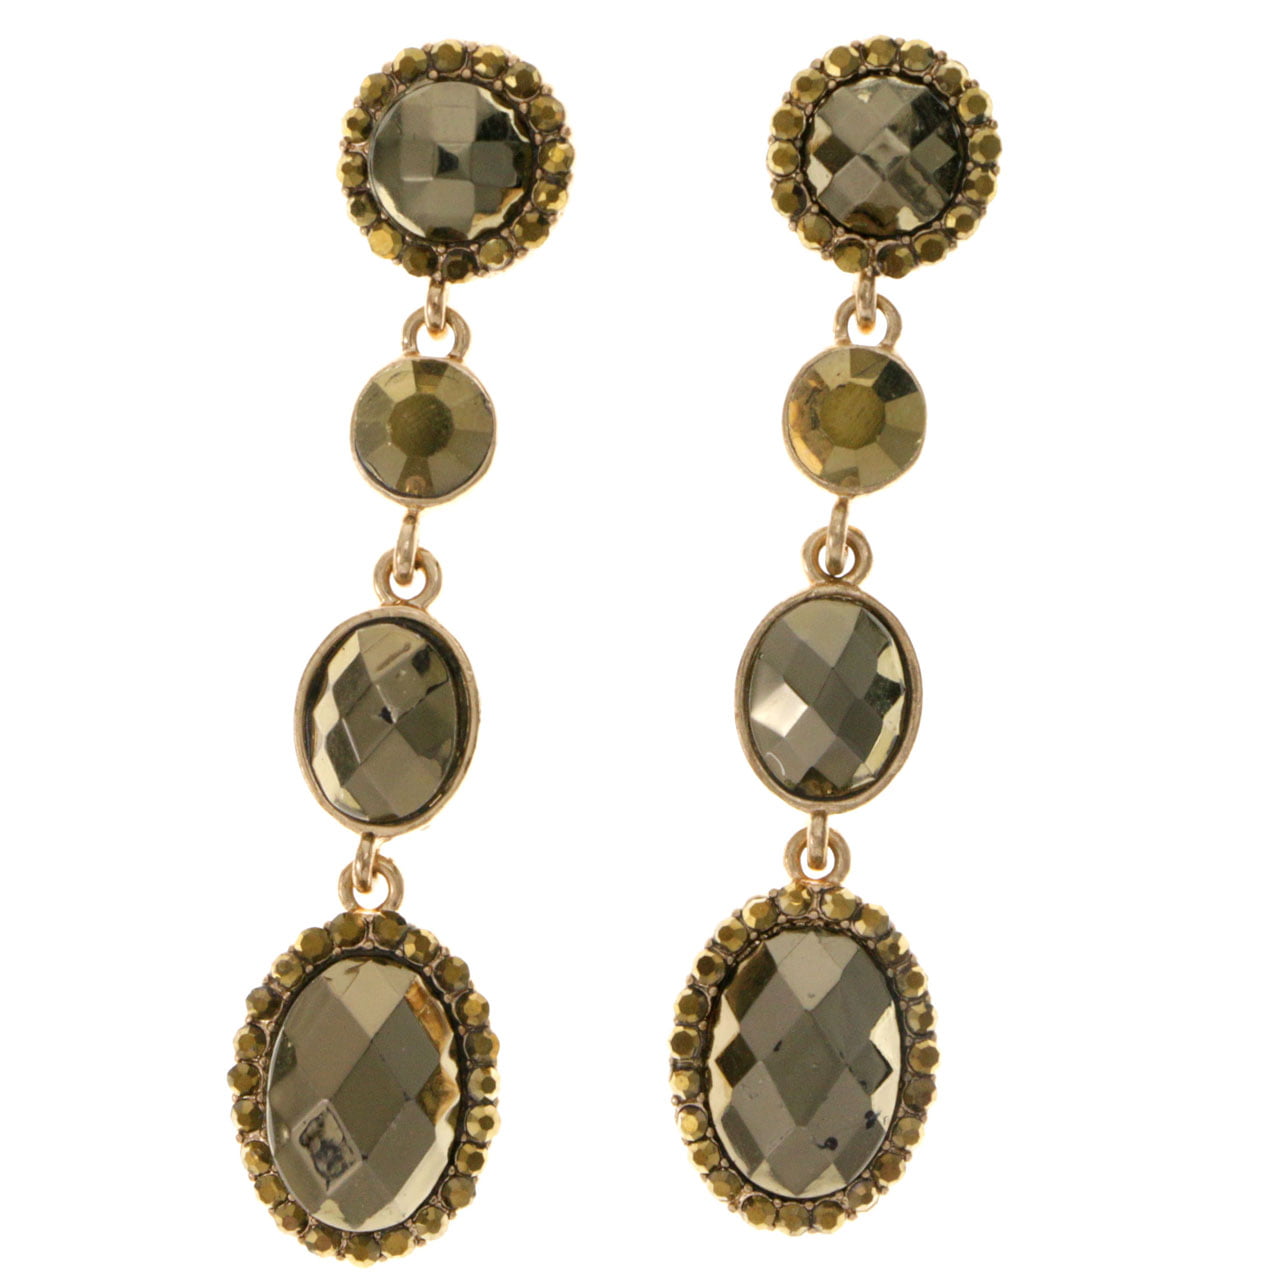 Hoop Earrings With Sparkling Green Faceted Crystal Accents Gold-Tone 